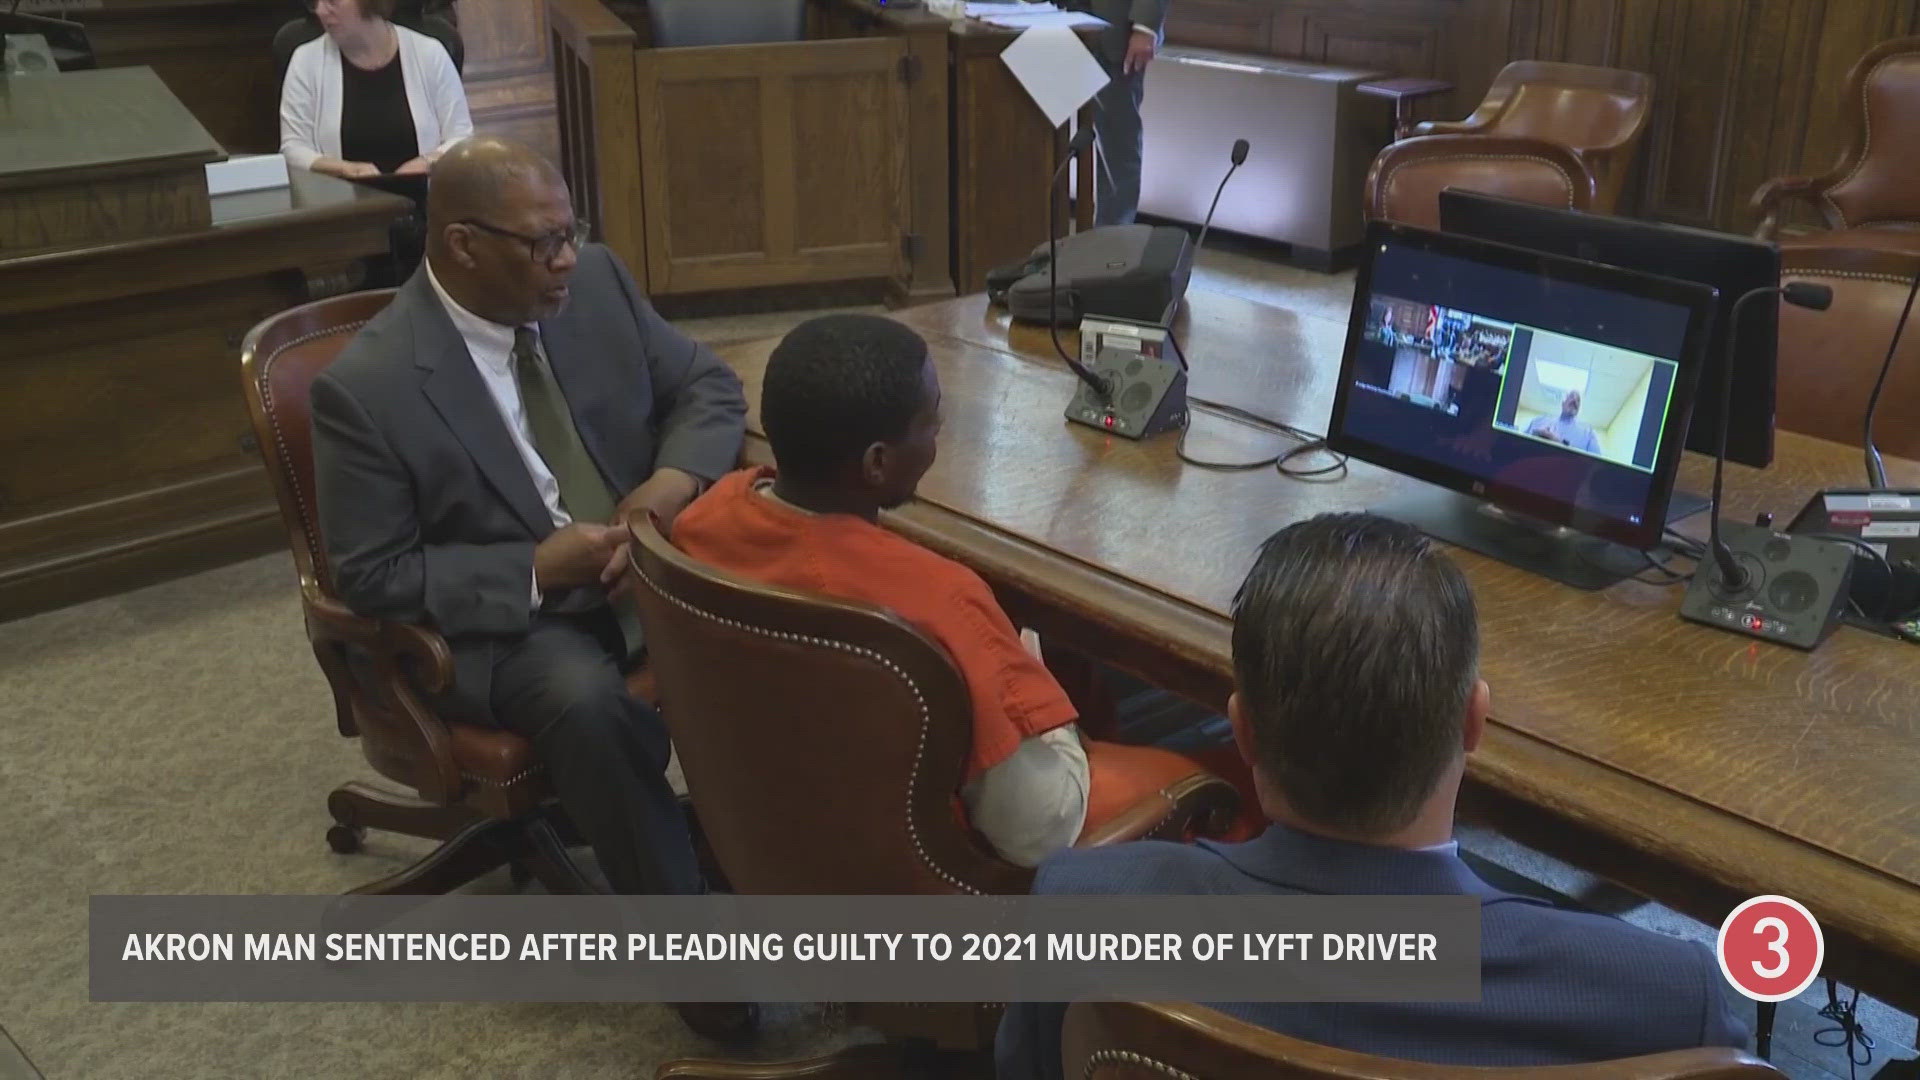 Kahlyl Powe pleaded guilty to several charges, including murder, in connection with the death of 48-year-old Kristopher Roukey in May of 2021.